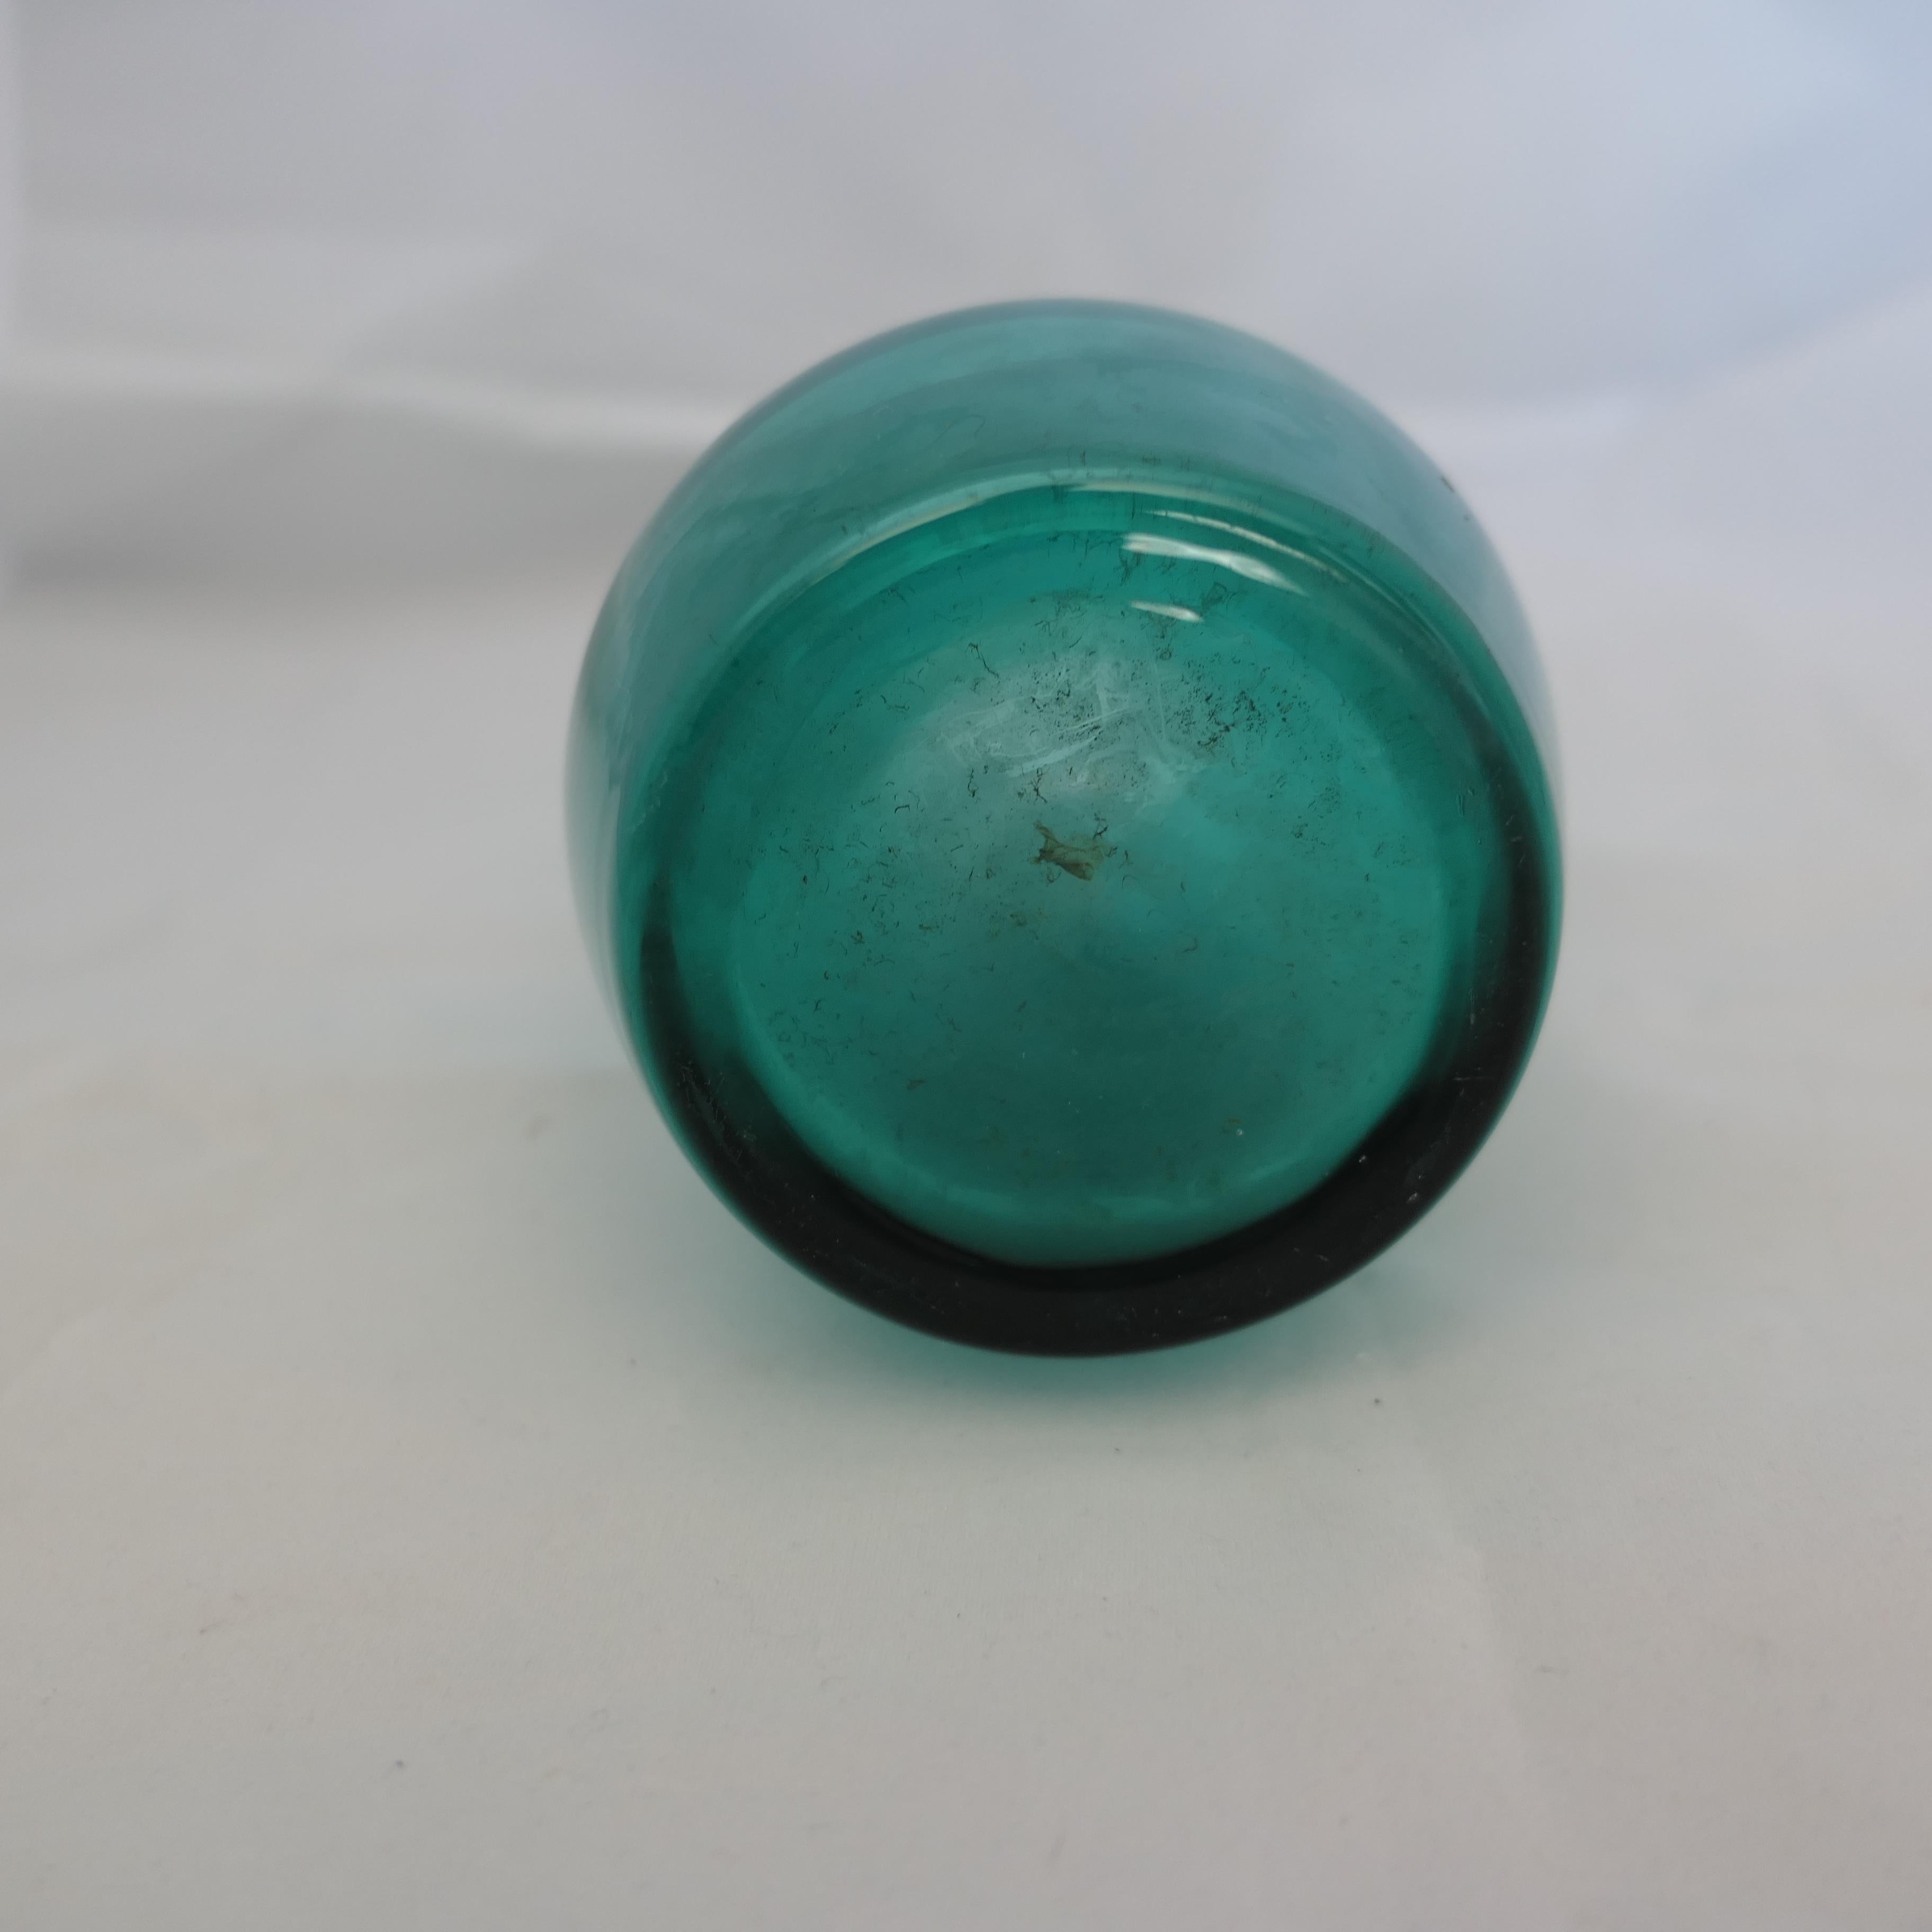 Mid-20th Century 1960s Green Glass Vase by Tamara Aladin for Riihimäen Lasi Oy      For Sale